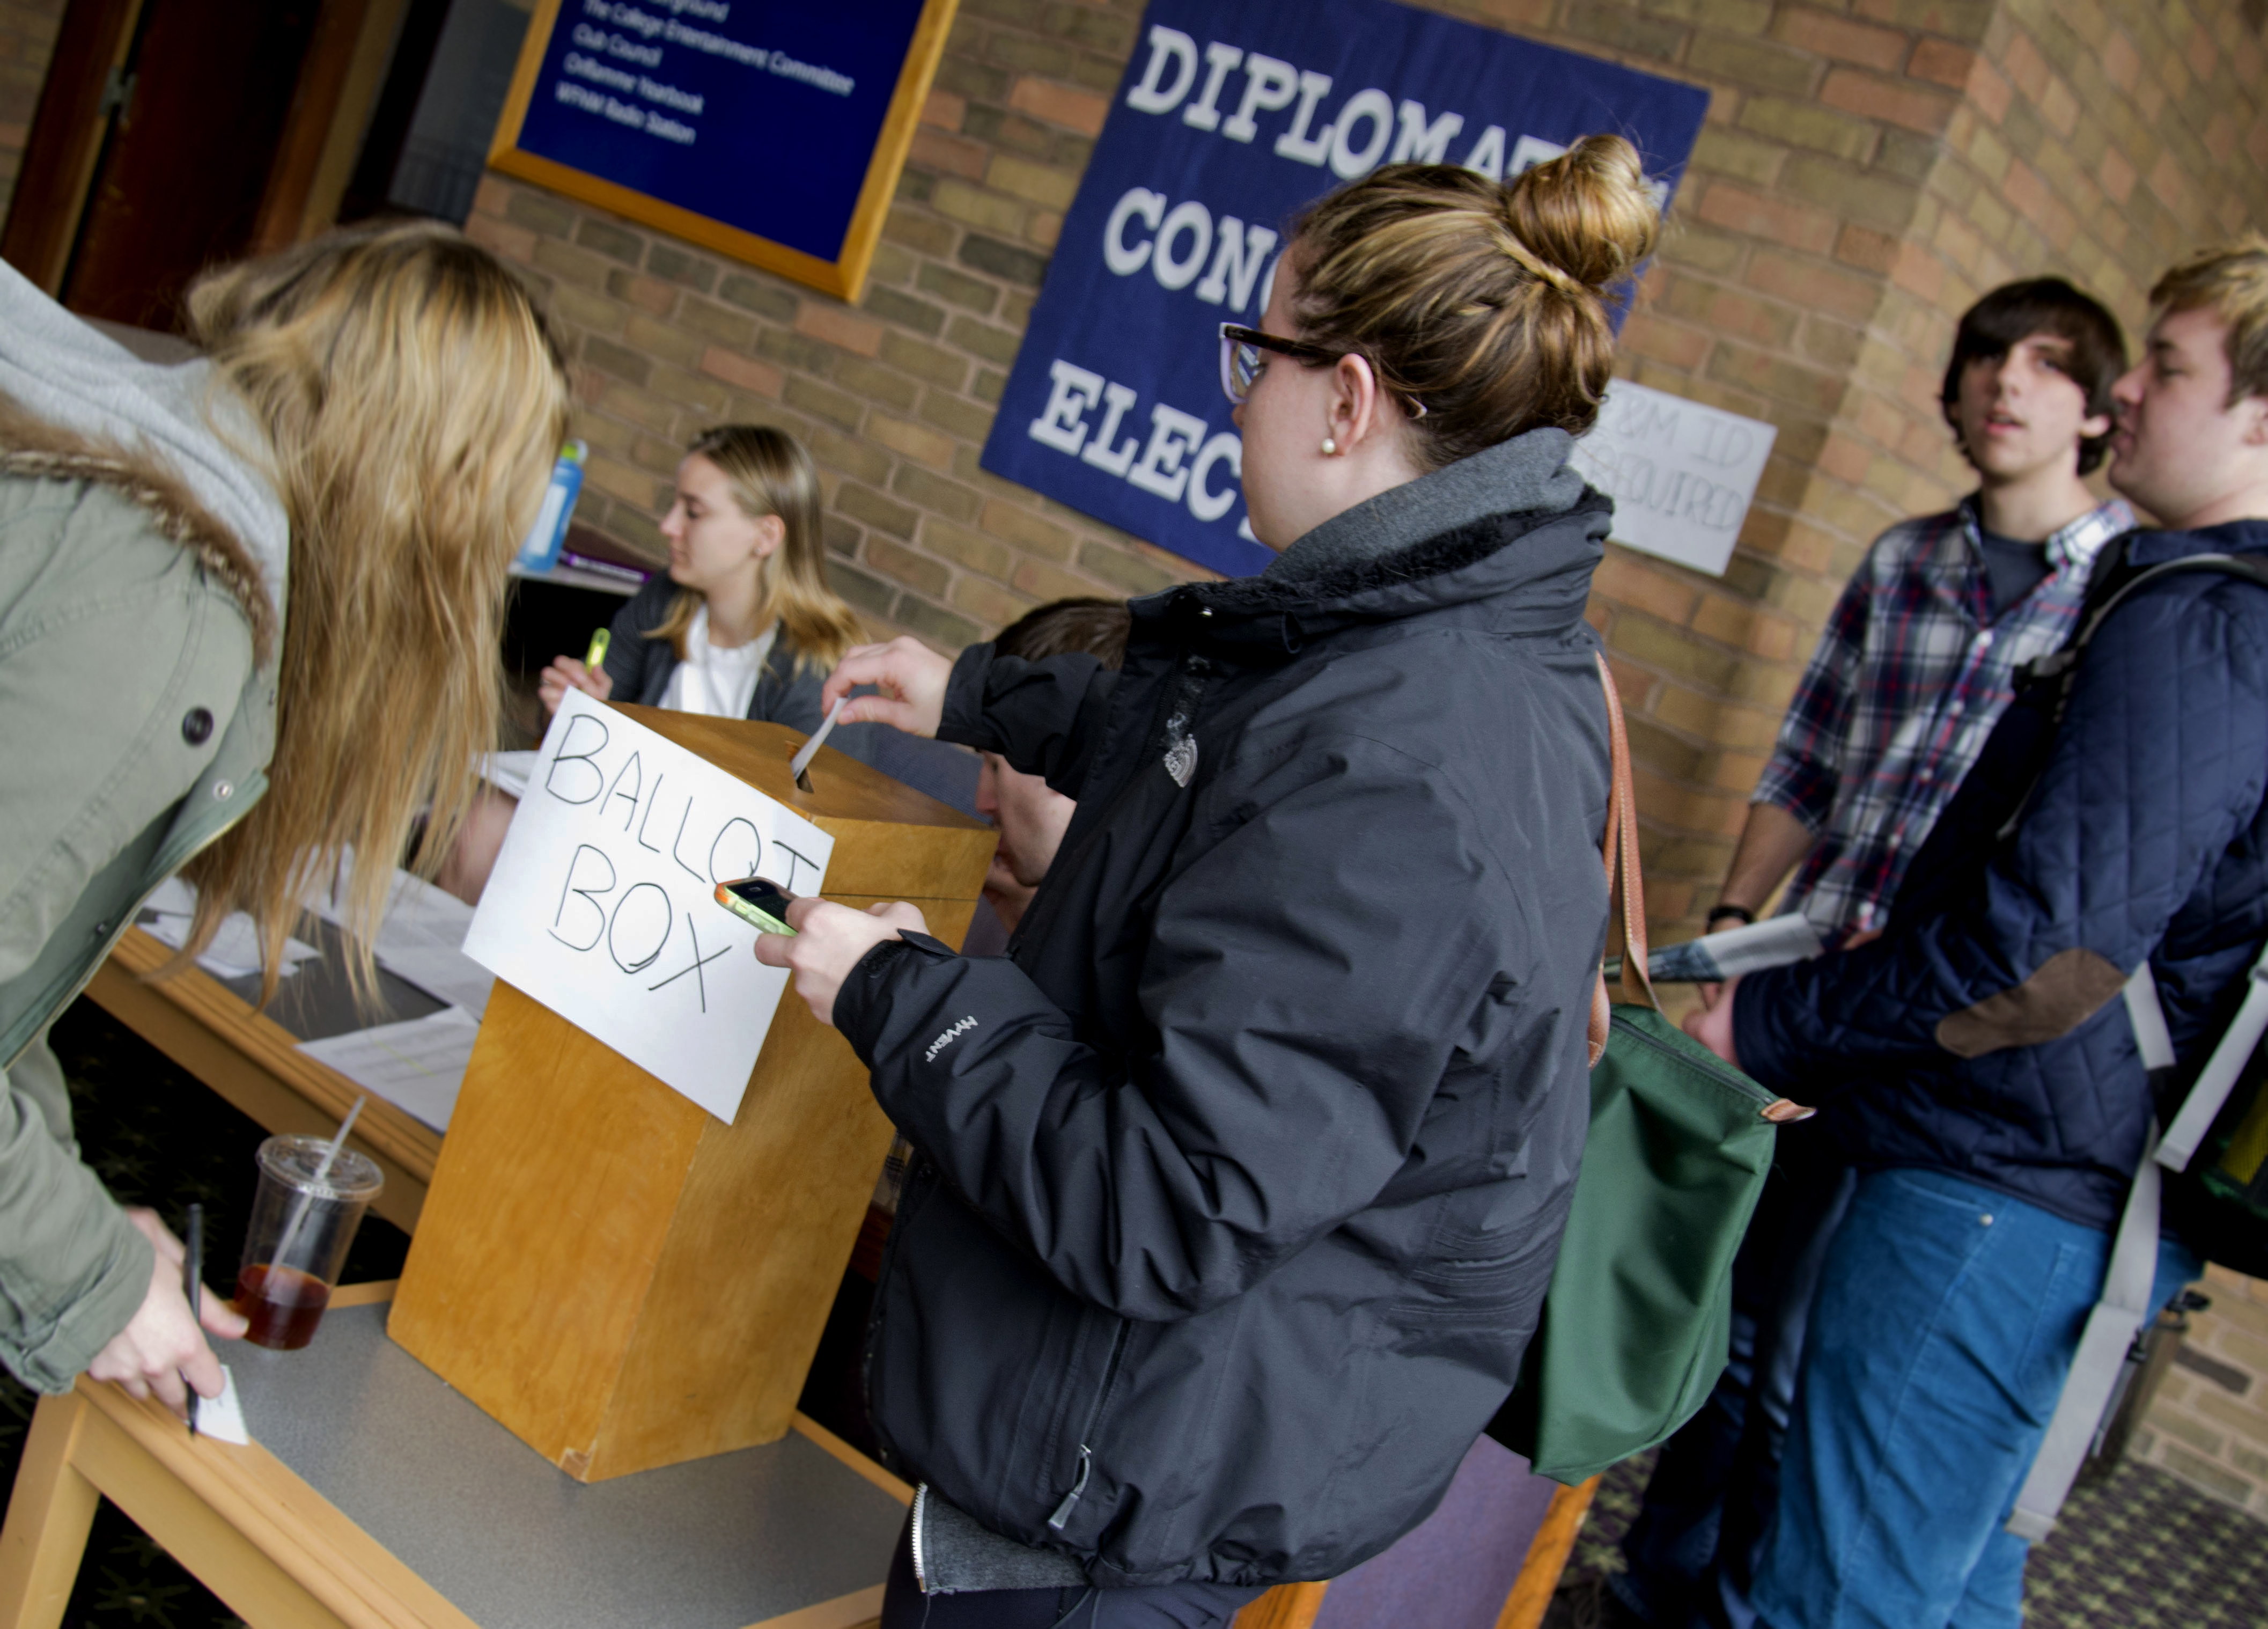 Elections for the executive board of the Diplomatic Congress were held last Tuesday, April 1, on the second floor of the Steinman College Center. Photo by Krissy Montville '14